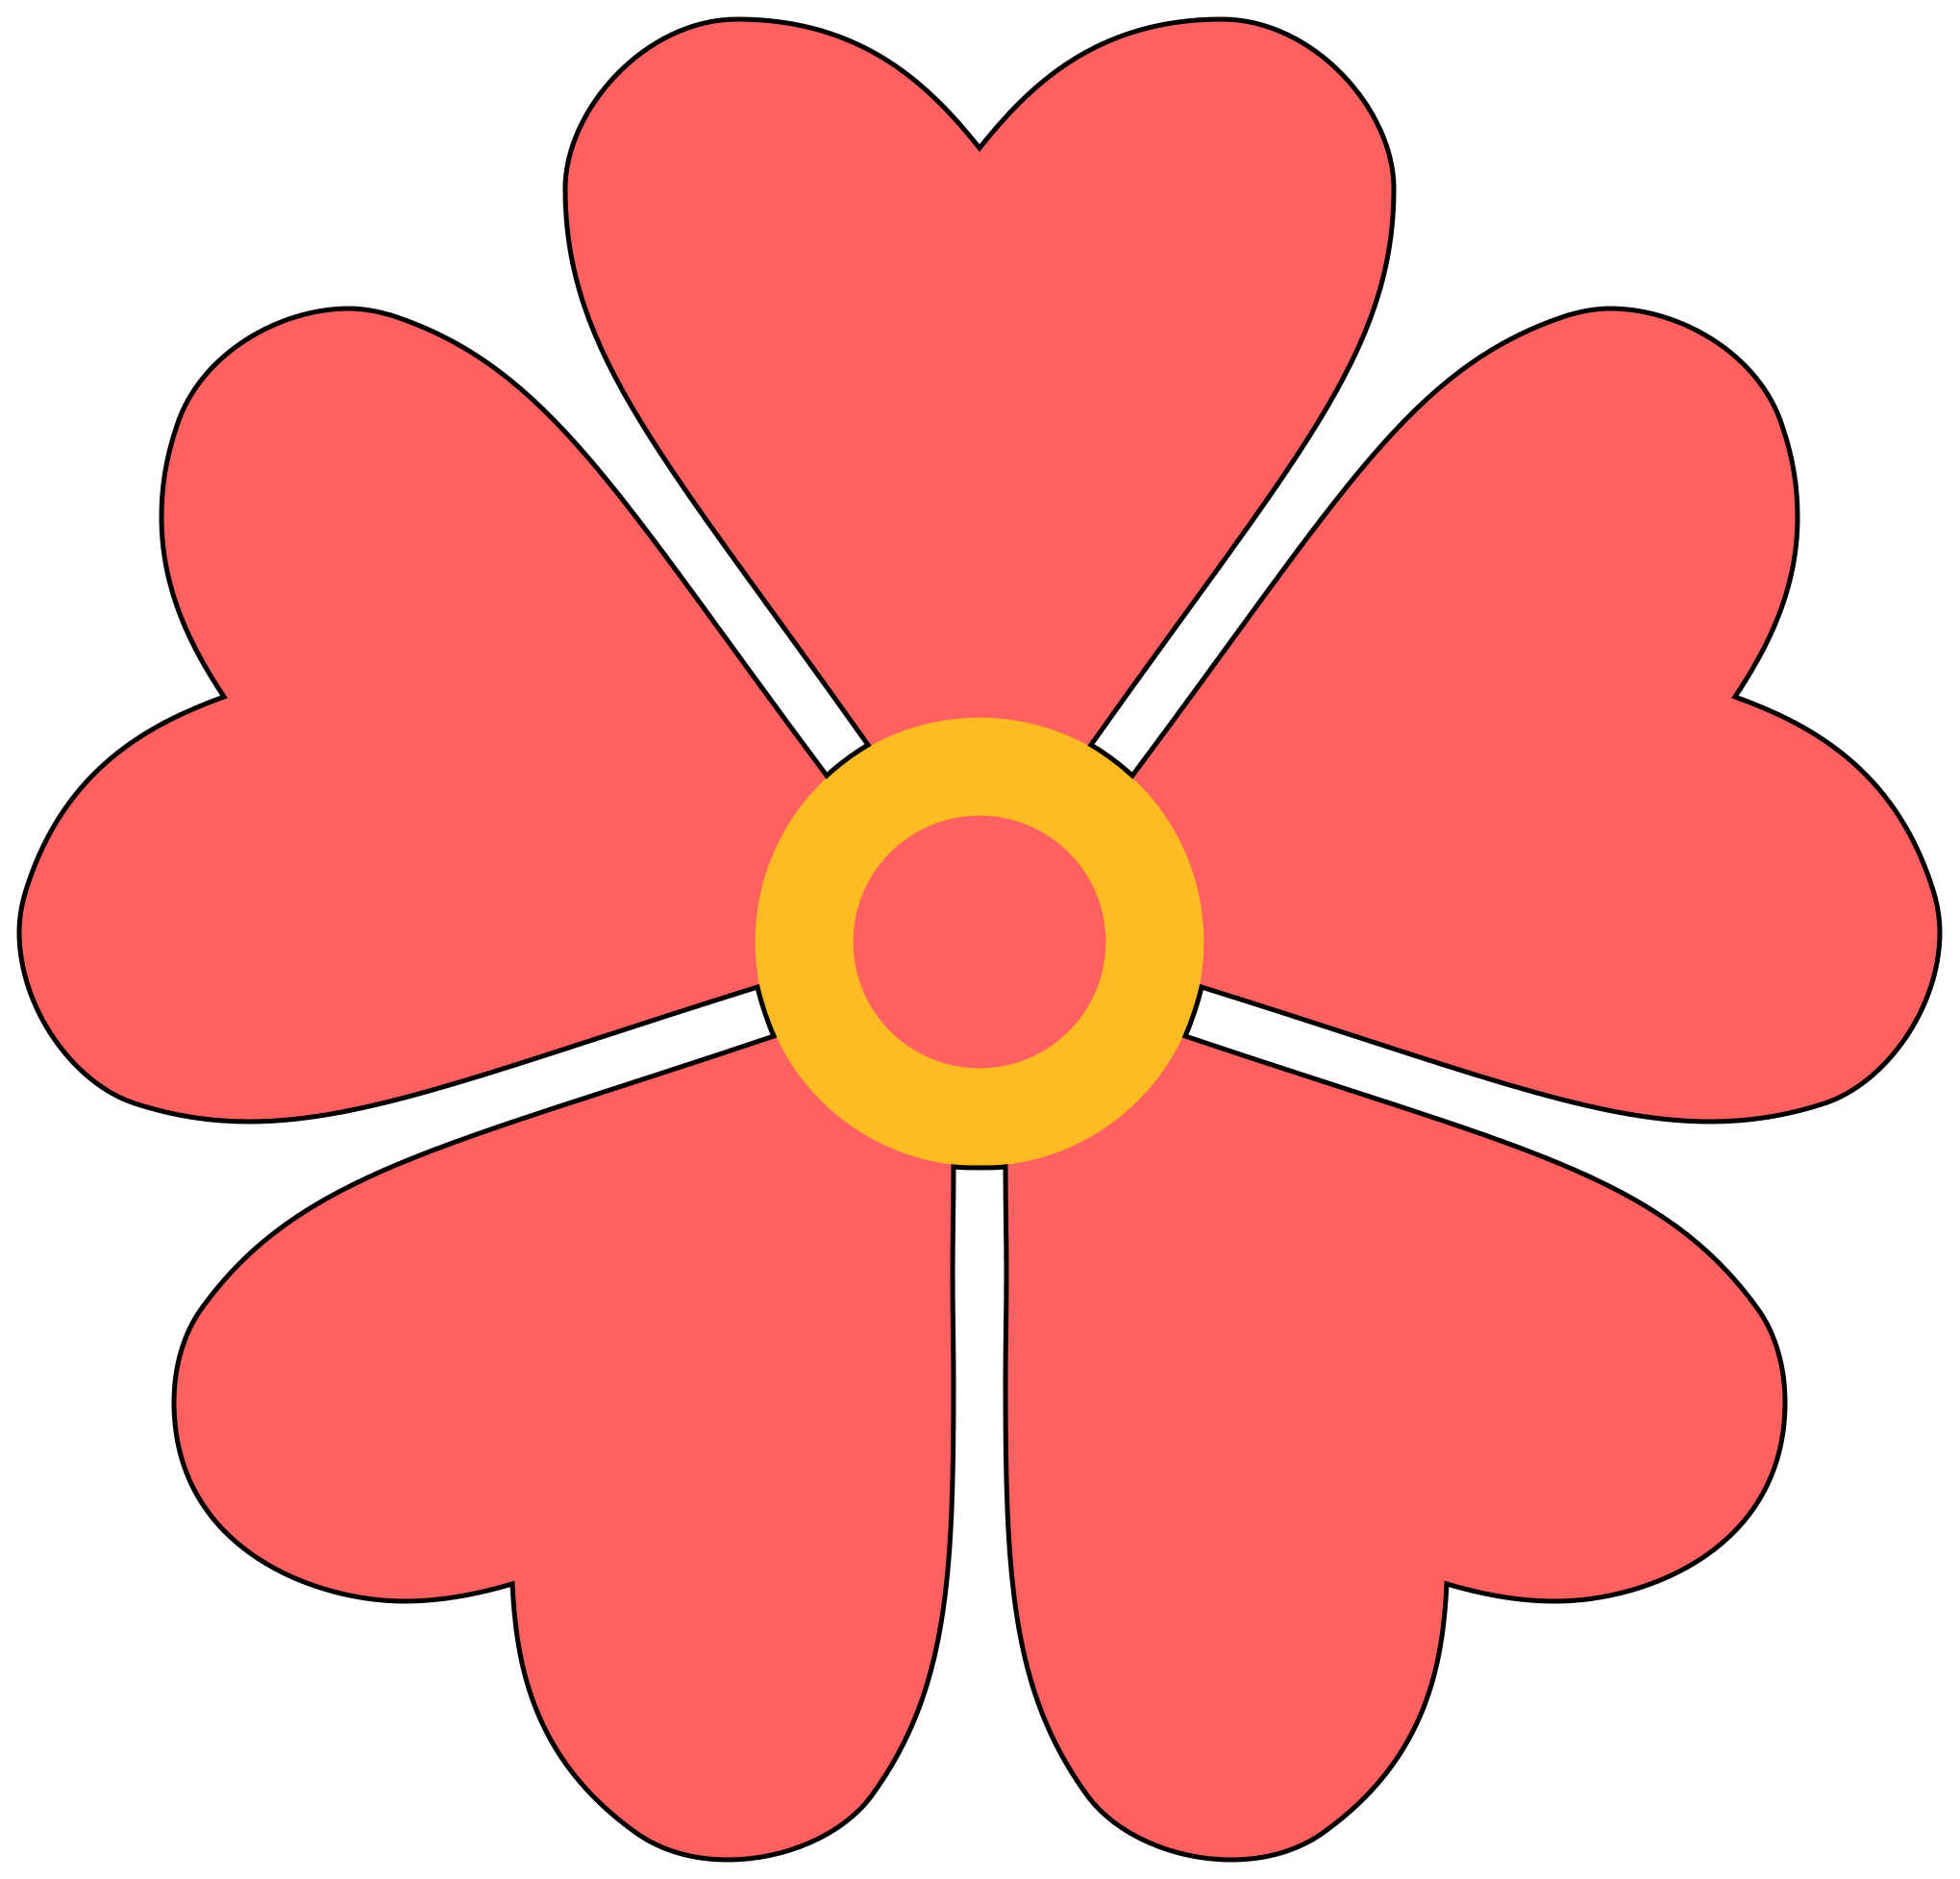 Download File:Flower with heart-shaped petals.svg - Wikipedia